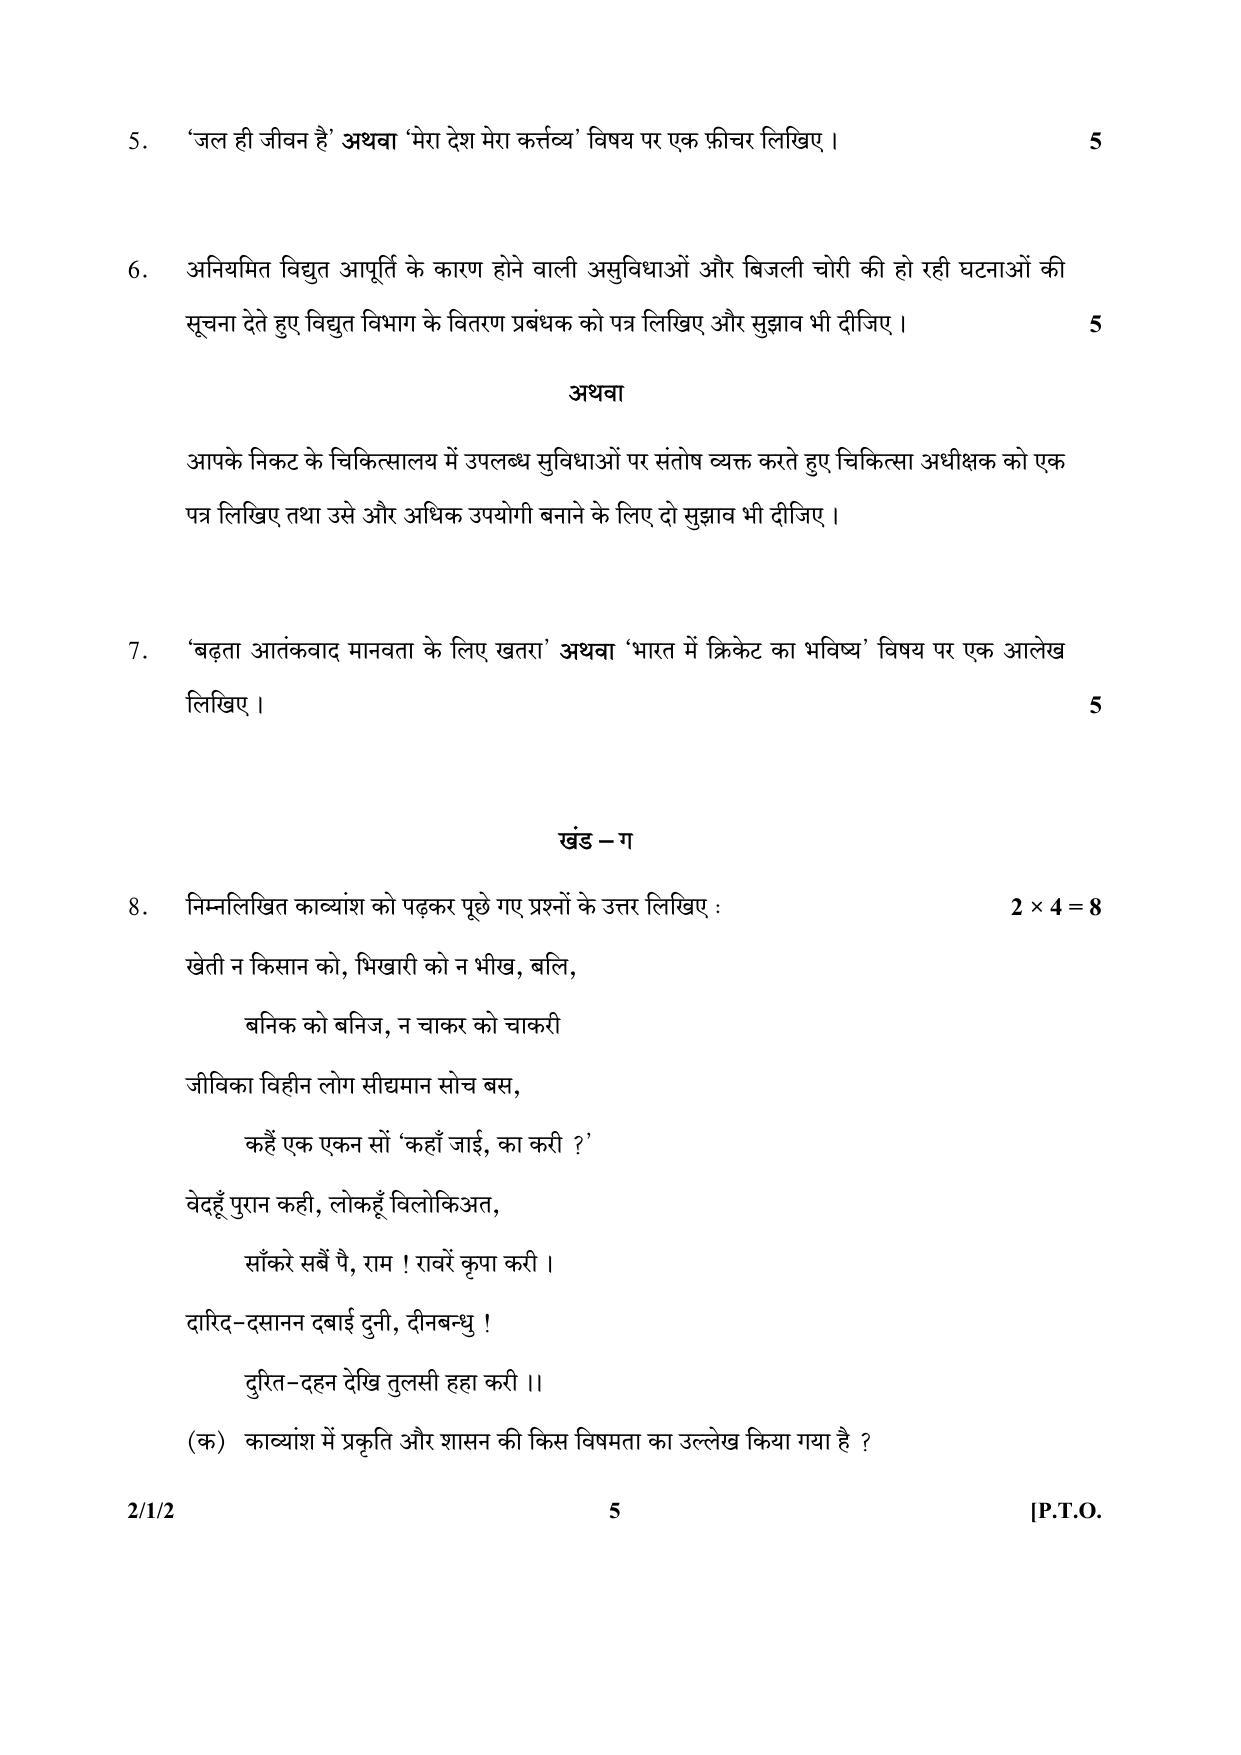 CBSE Class 12 2-1-2 (Hindi) 2017-comptt Question Paper - Page 5